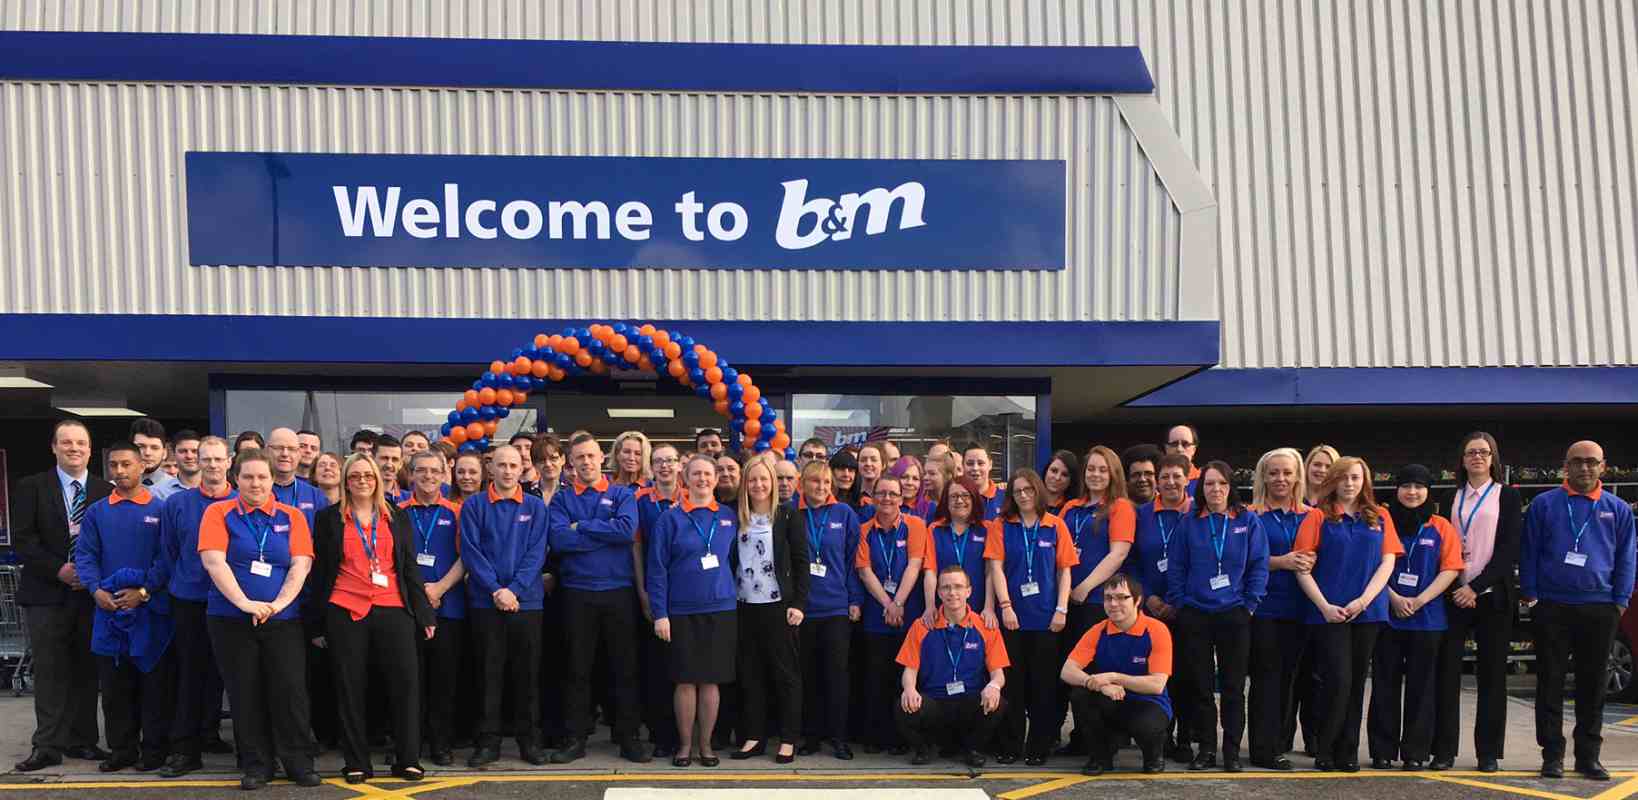 The brand new store colleagues at B&M Crostons on opening day